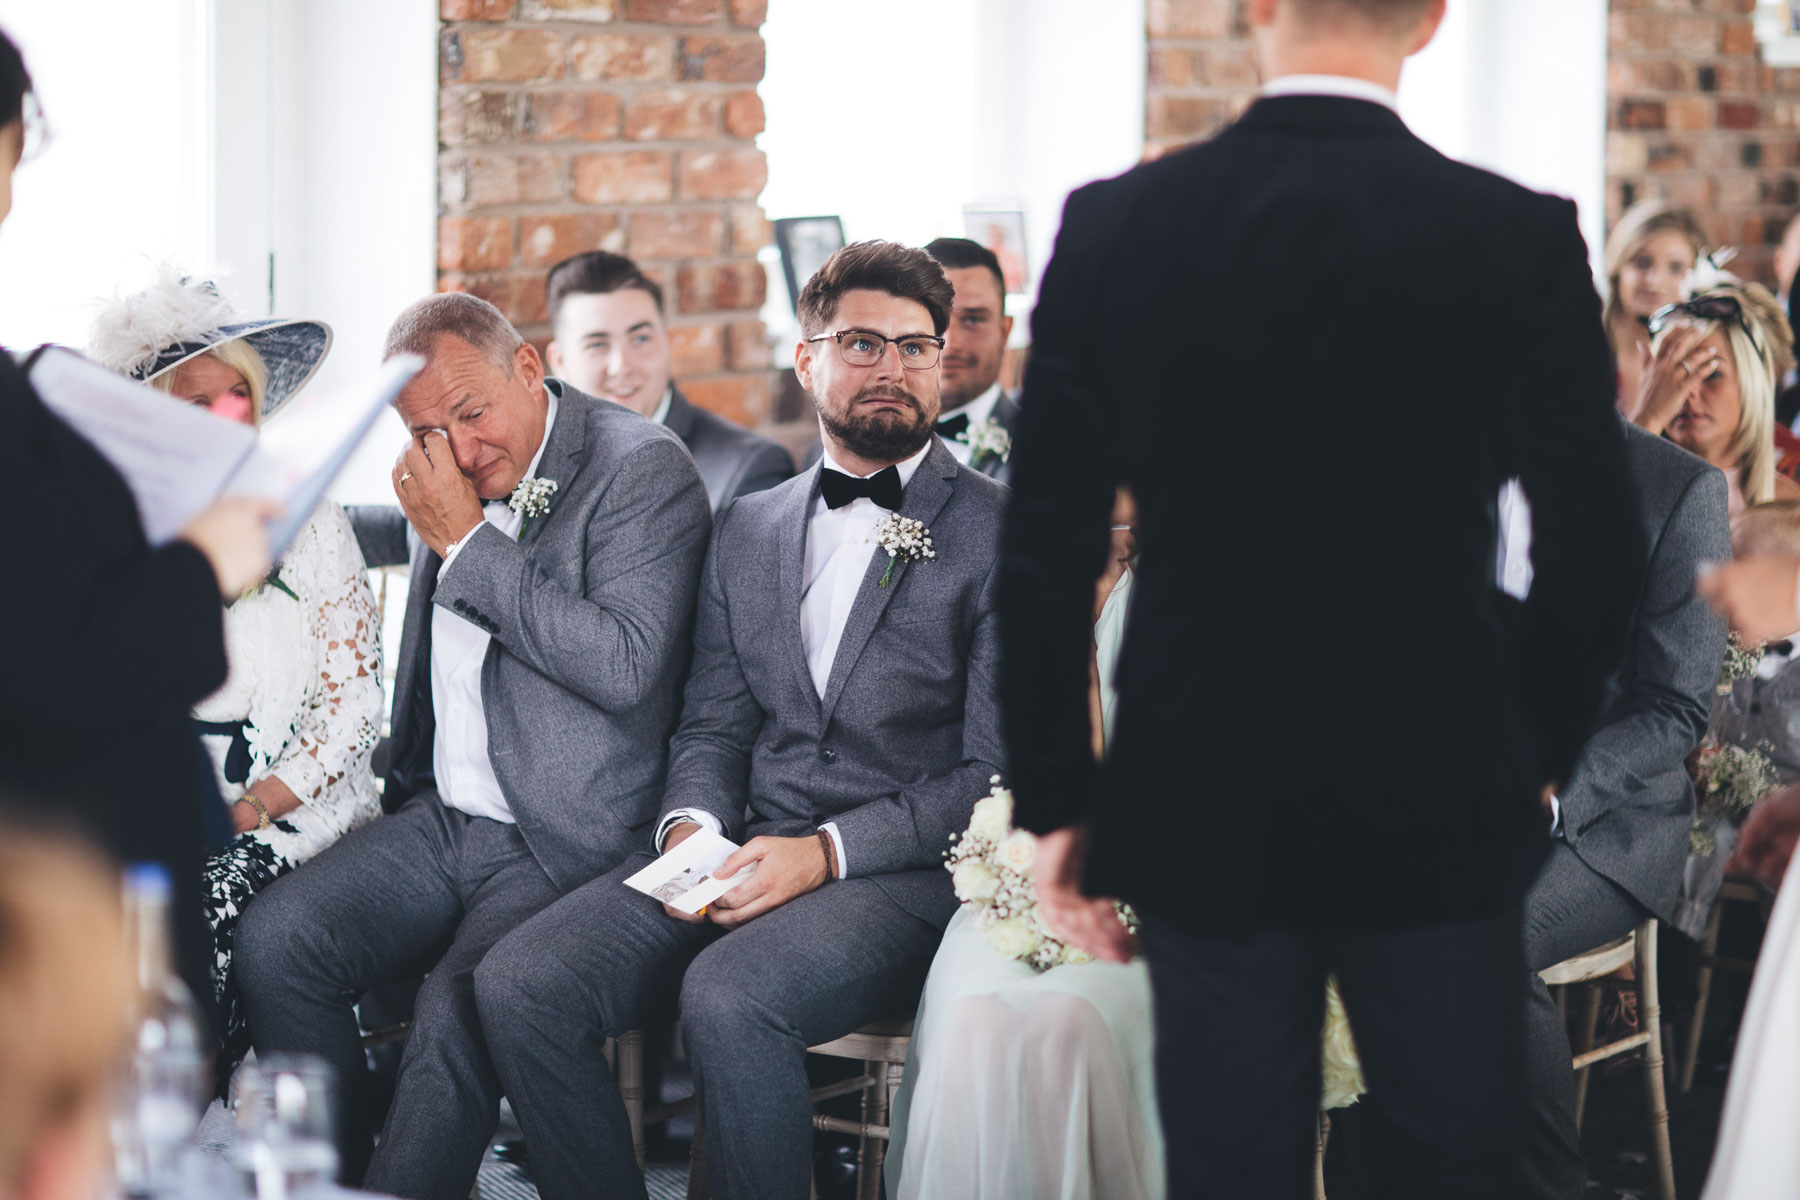 best man pulls silly face when asked for the wedding rings while father cries next to him